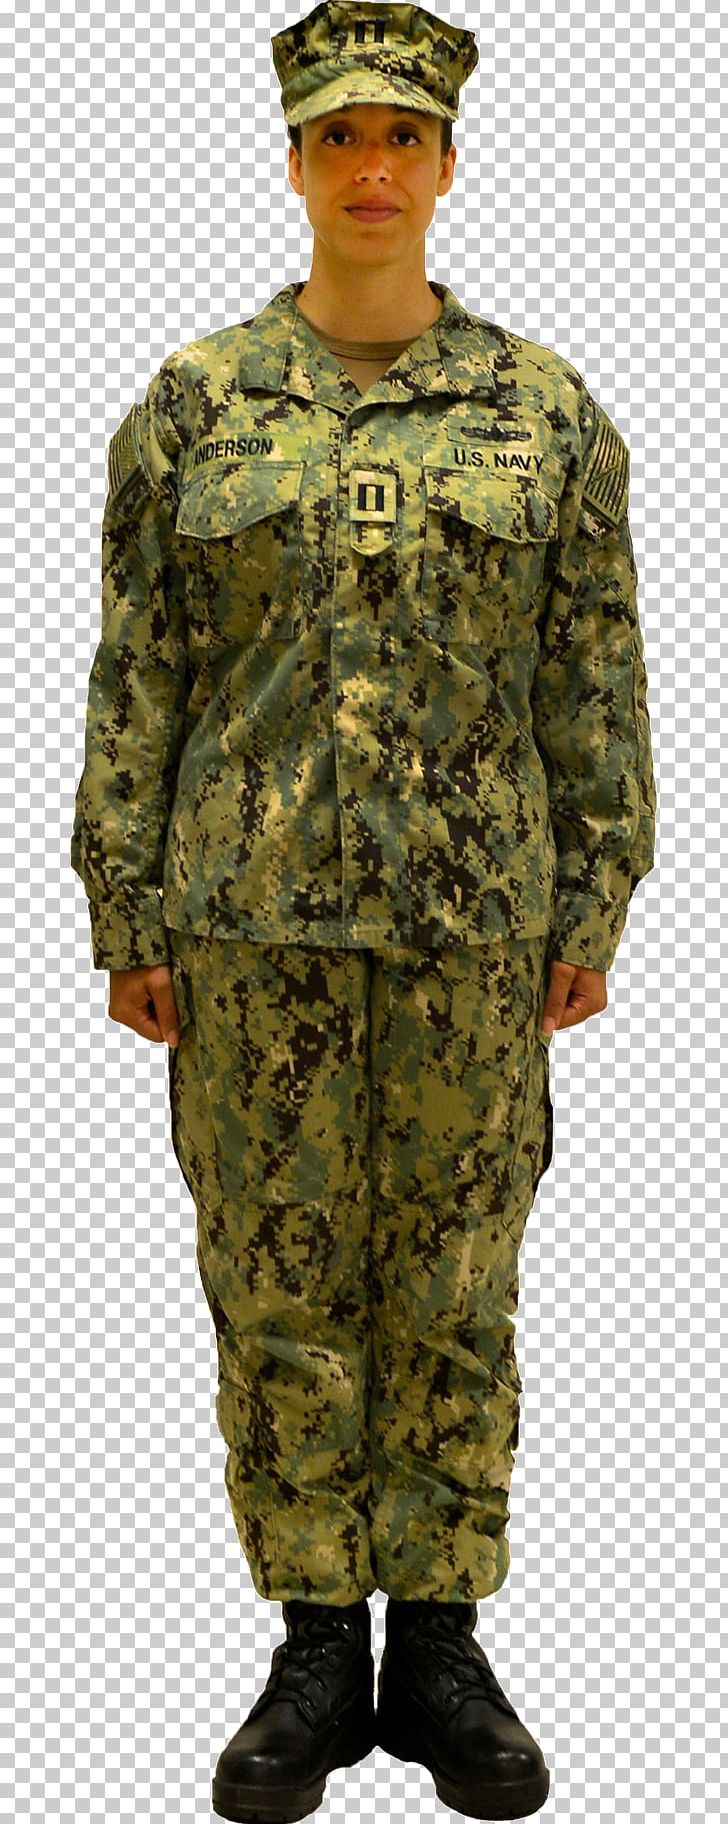 Uniforms Of The United States Navy Military Camouflage Army Combat Uniform Uniforms Of The United States Armed Forces PNG, Clipart, Army, Infantry, Military Police, Miscellaneous, Navy Free PNG Download